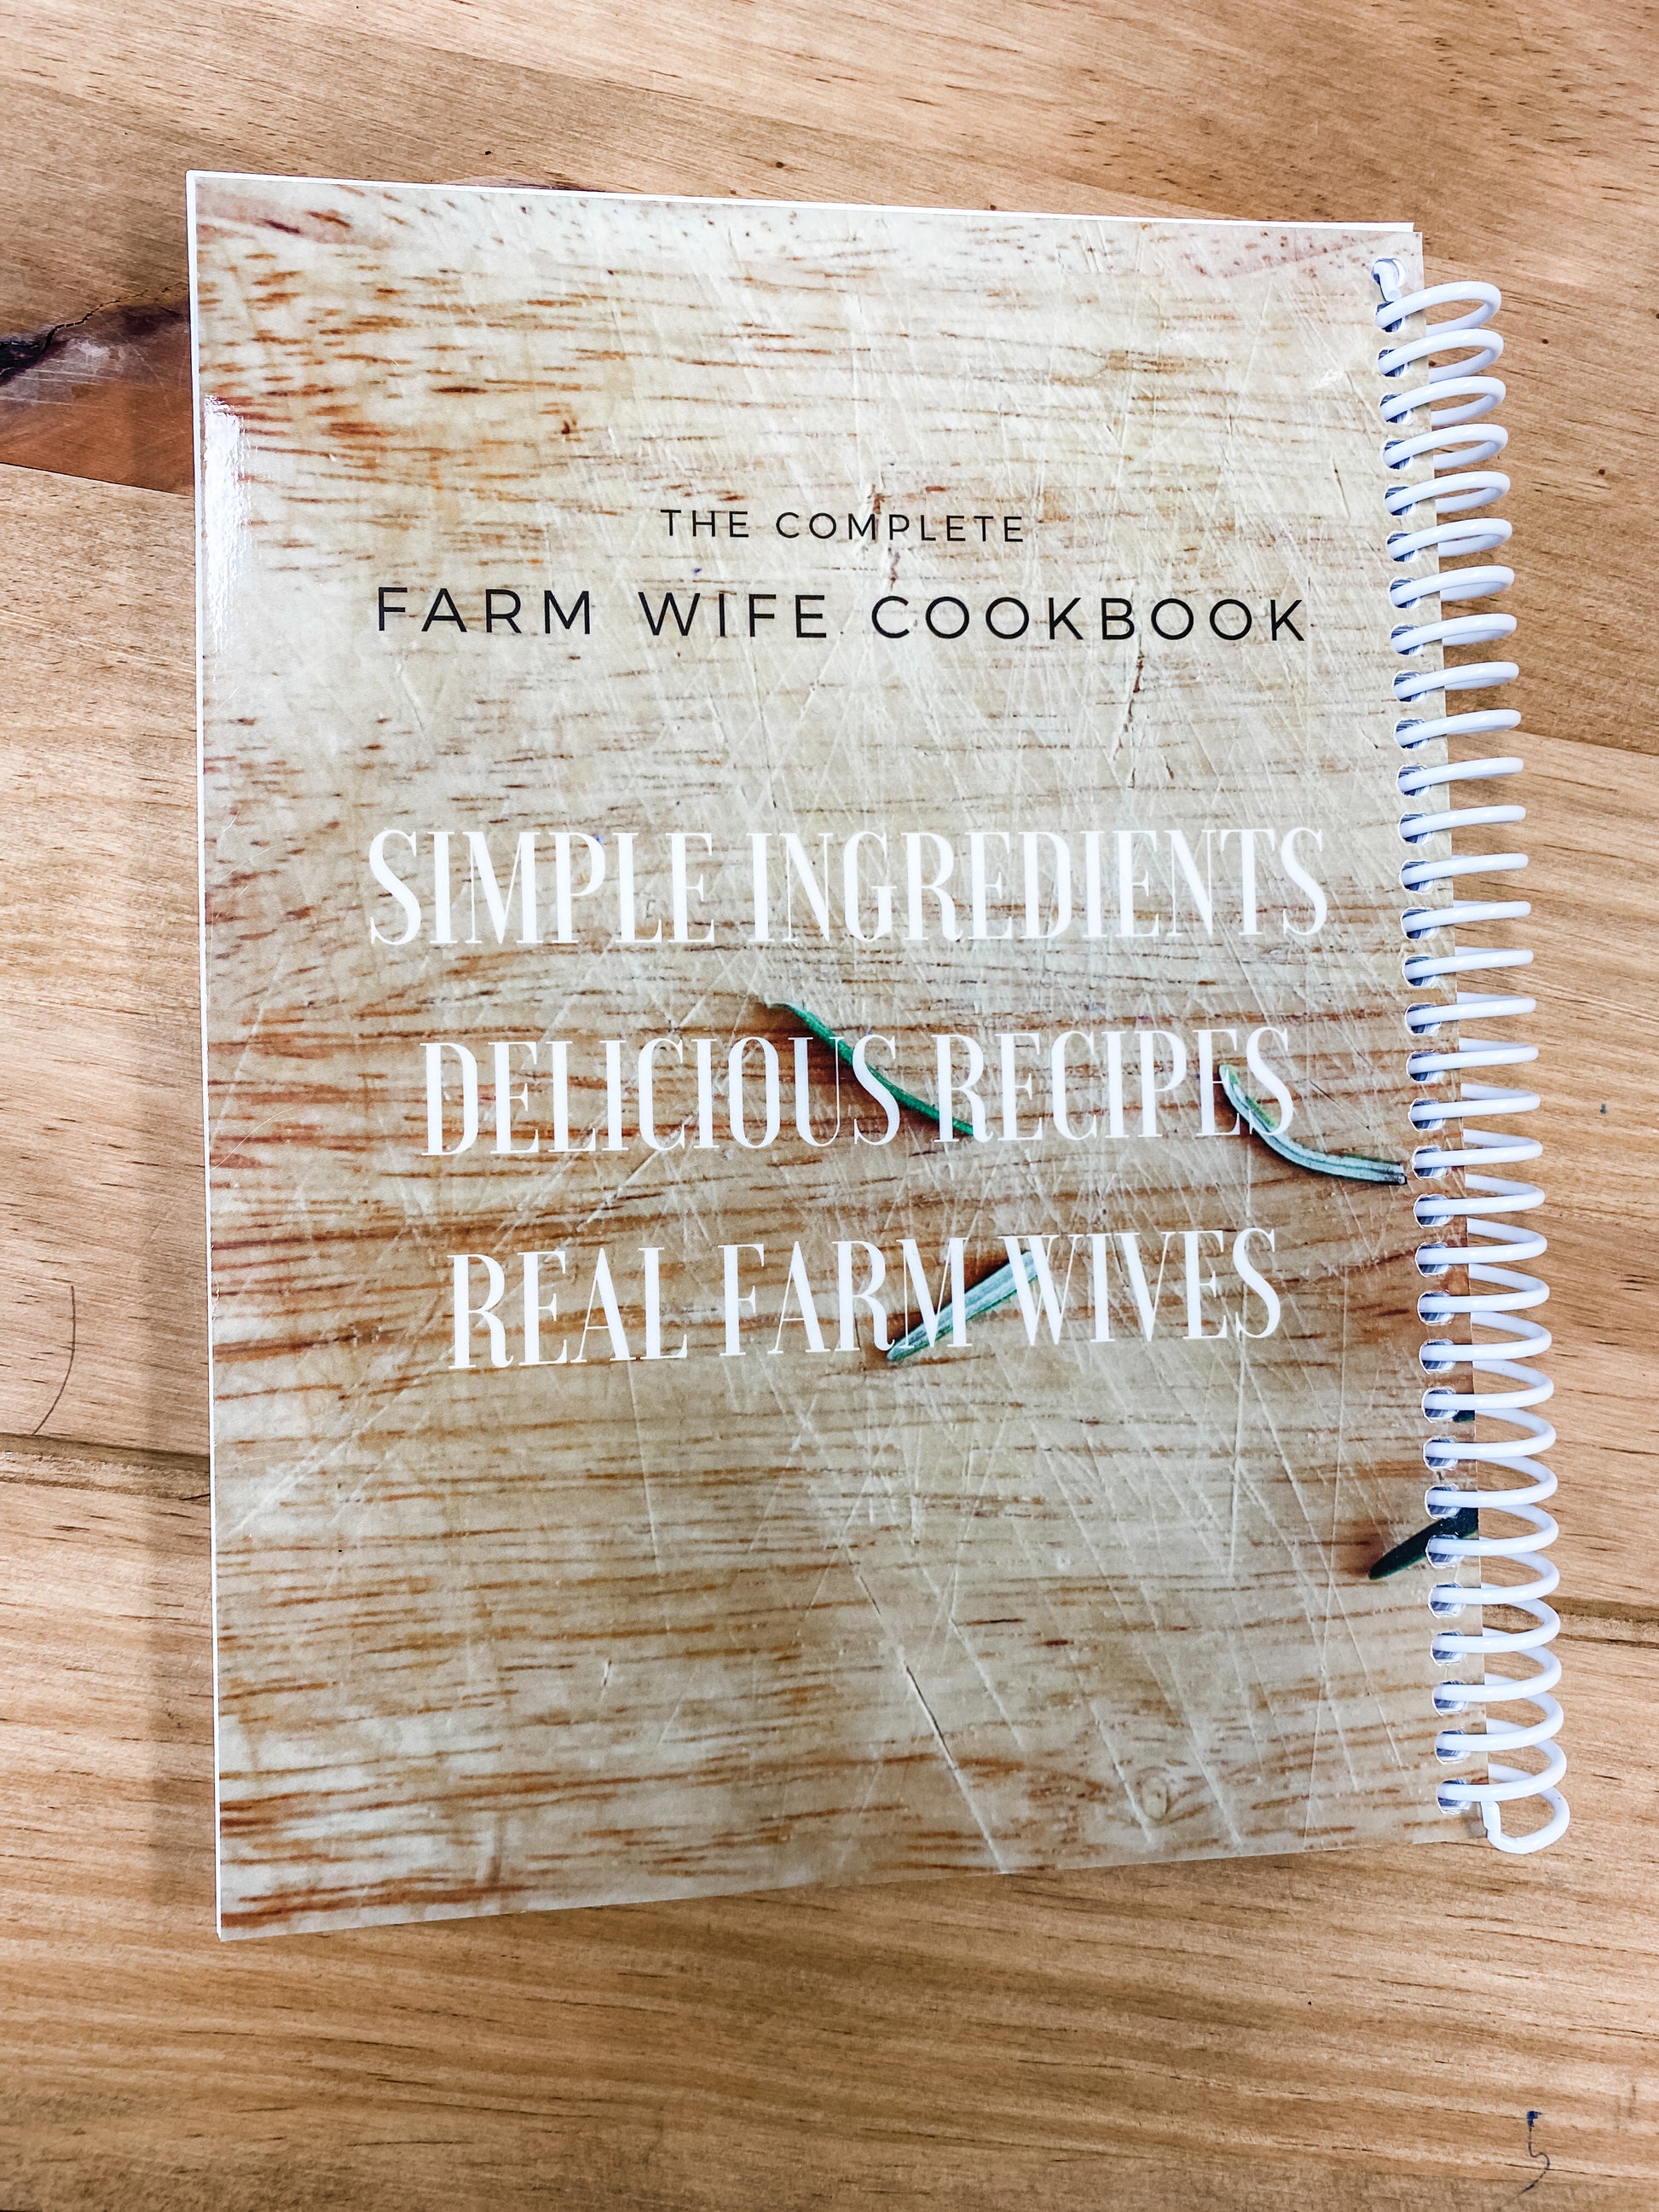 Back of the complete farm wife cookbook